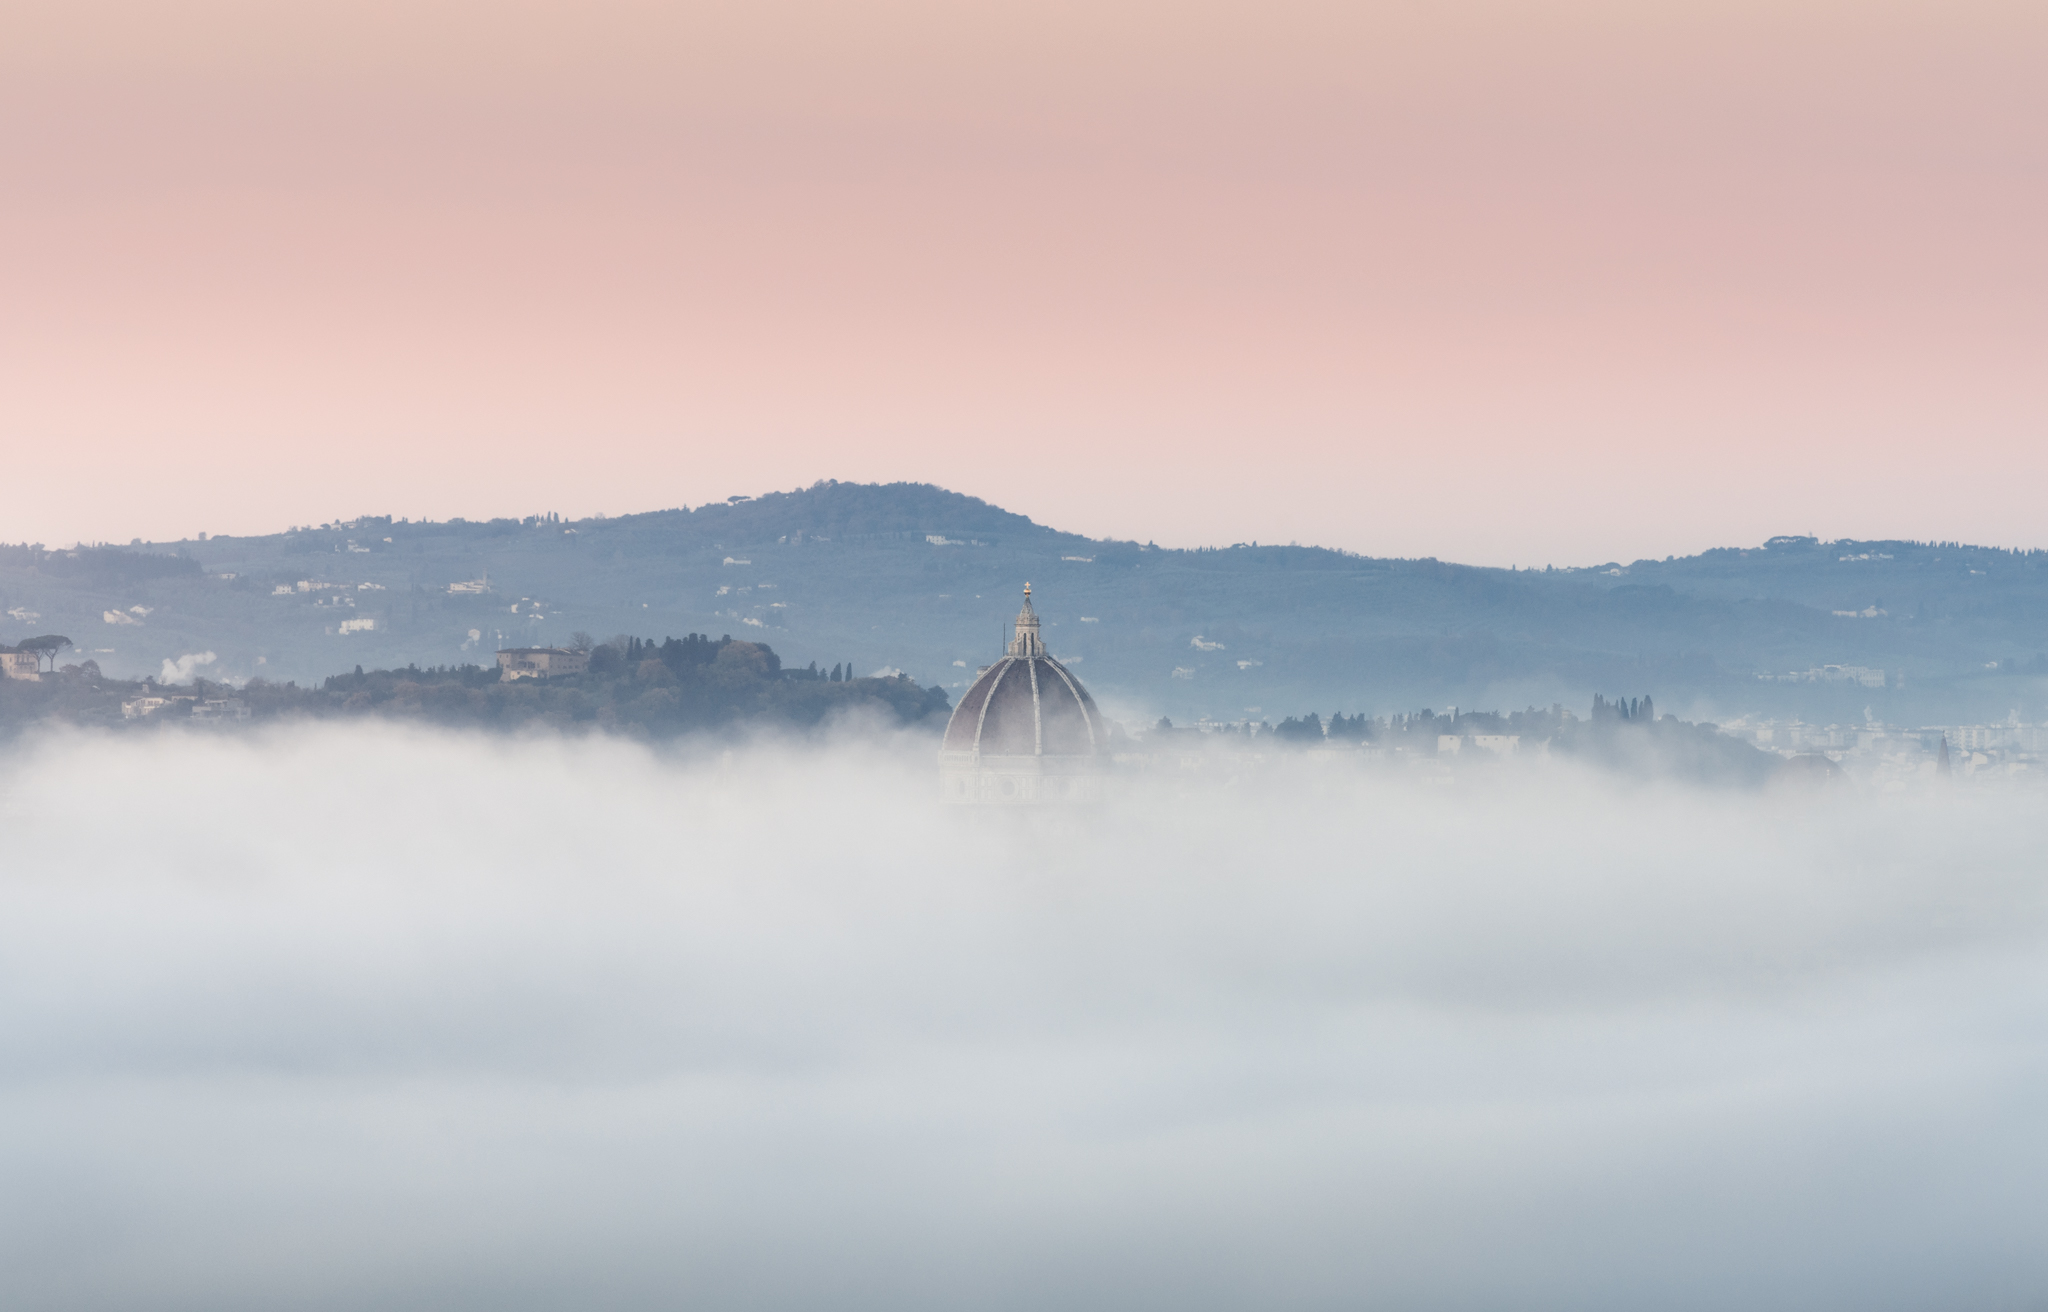 The Duomo comes out of the fog...